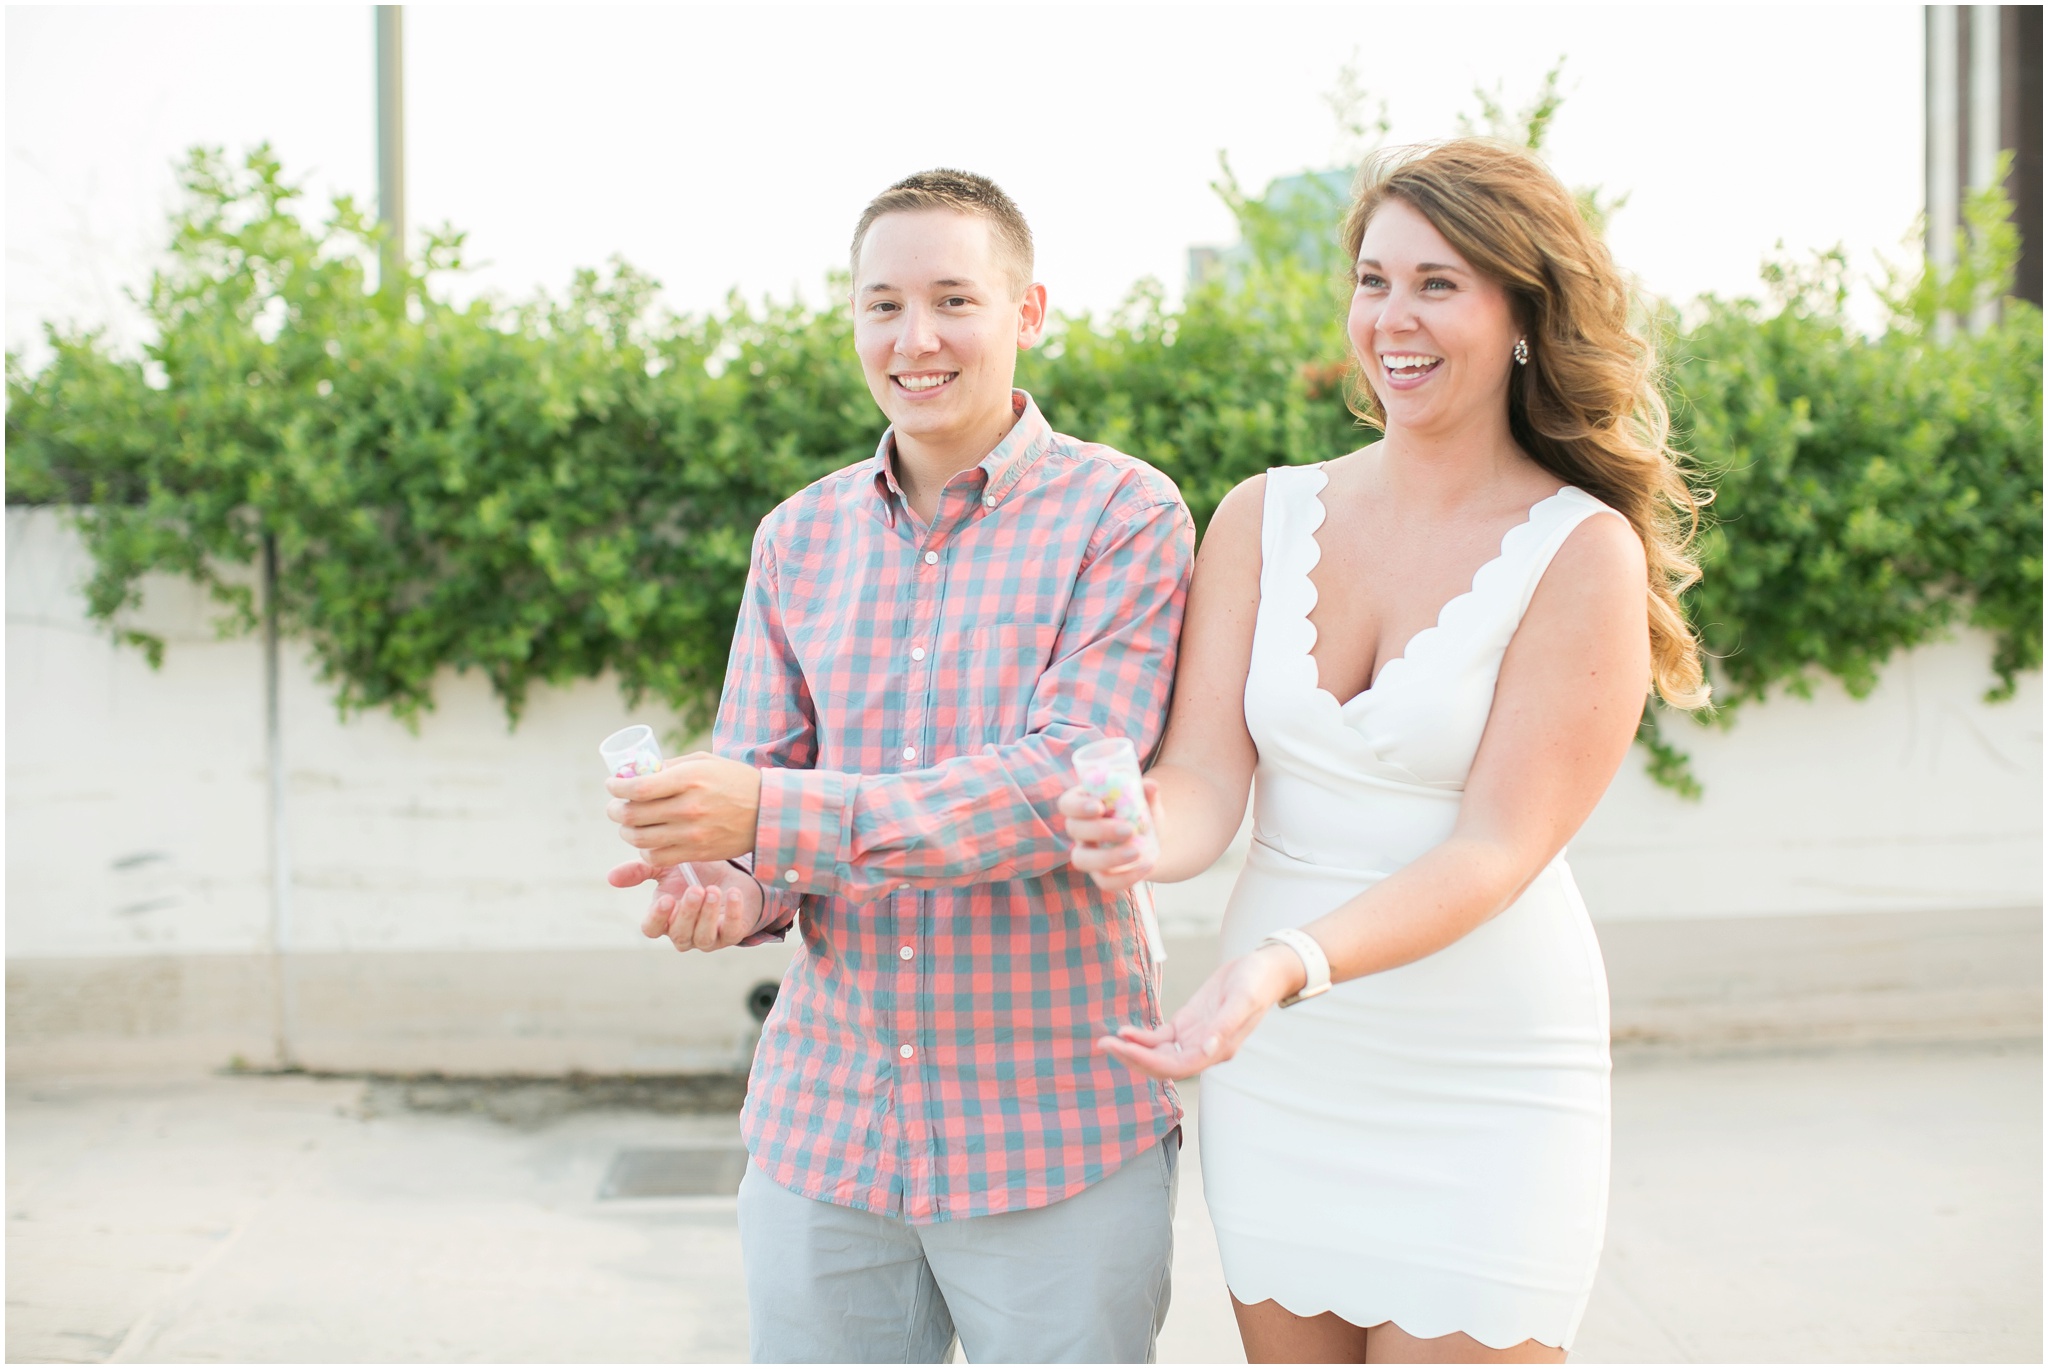 Downtown_Madison_Wisconsin_Engagement_Session_Waterfront_Monona_Terrace_0476.jpg